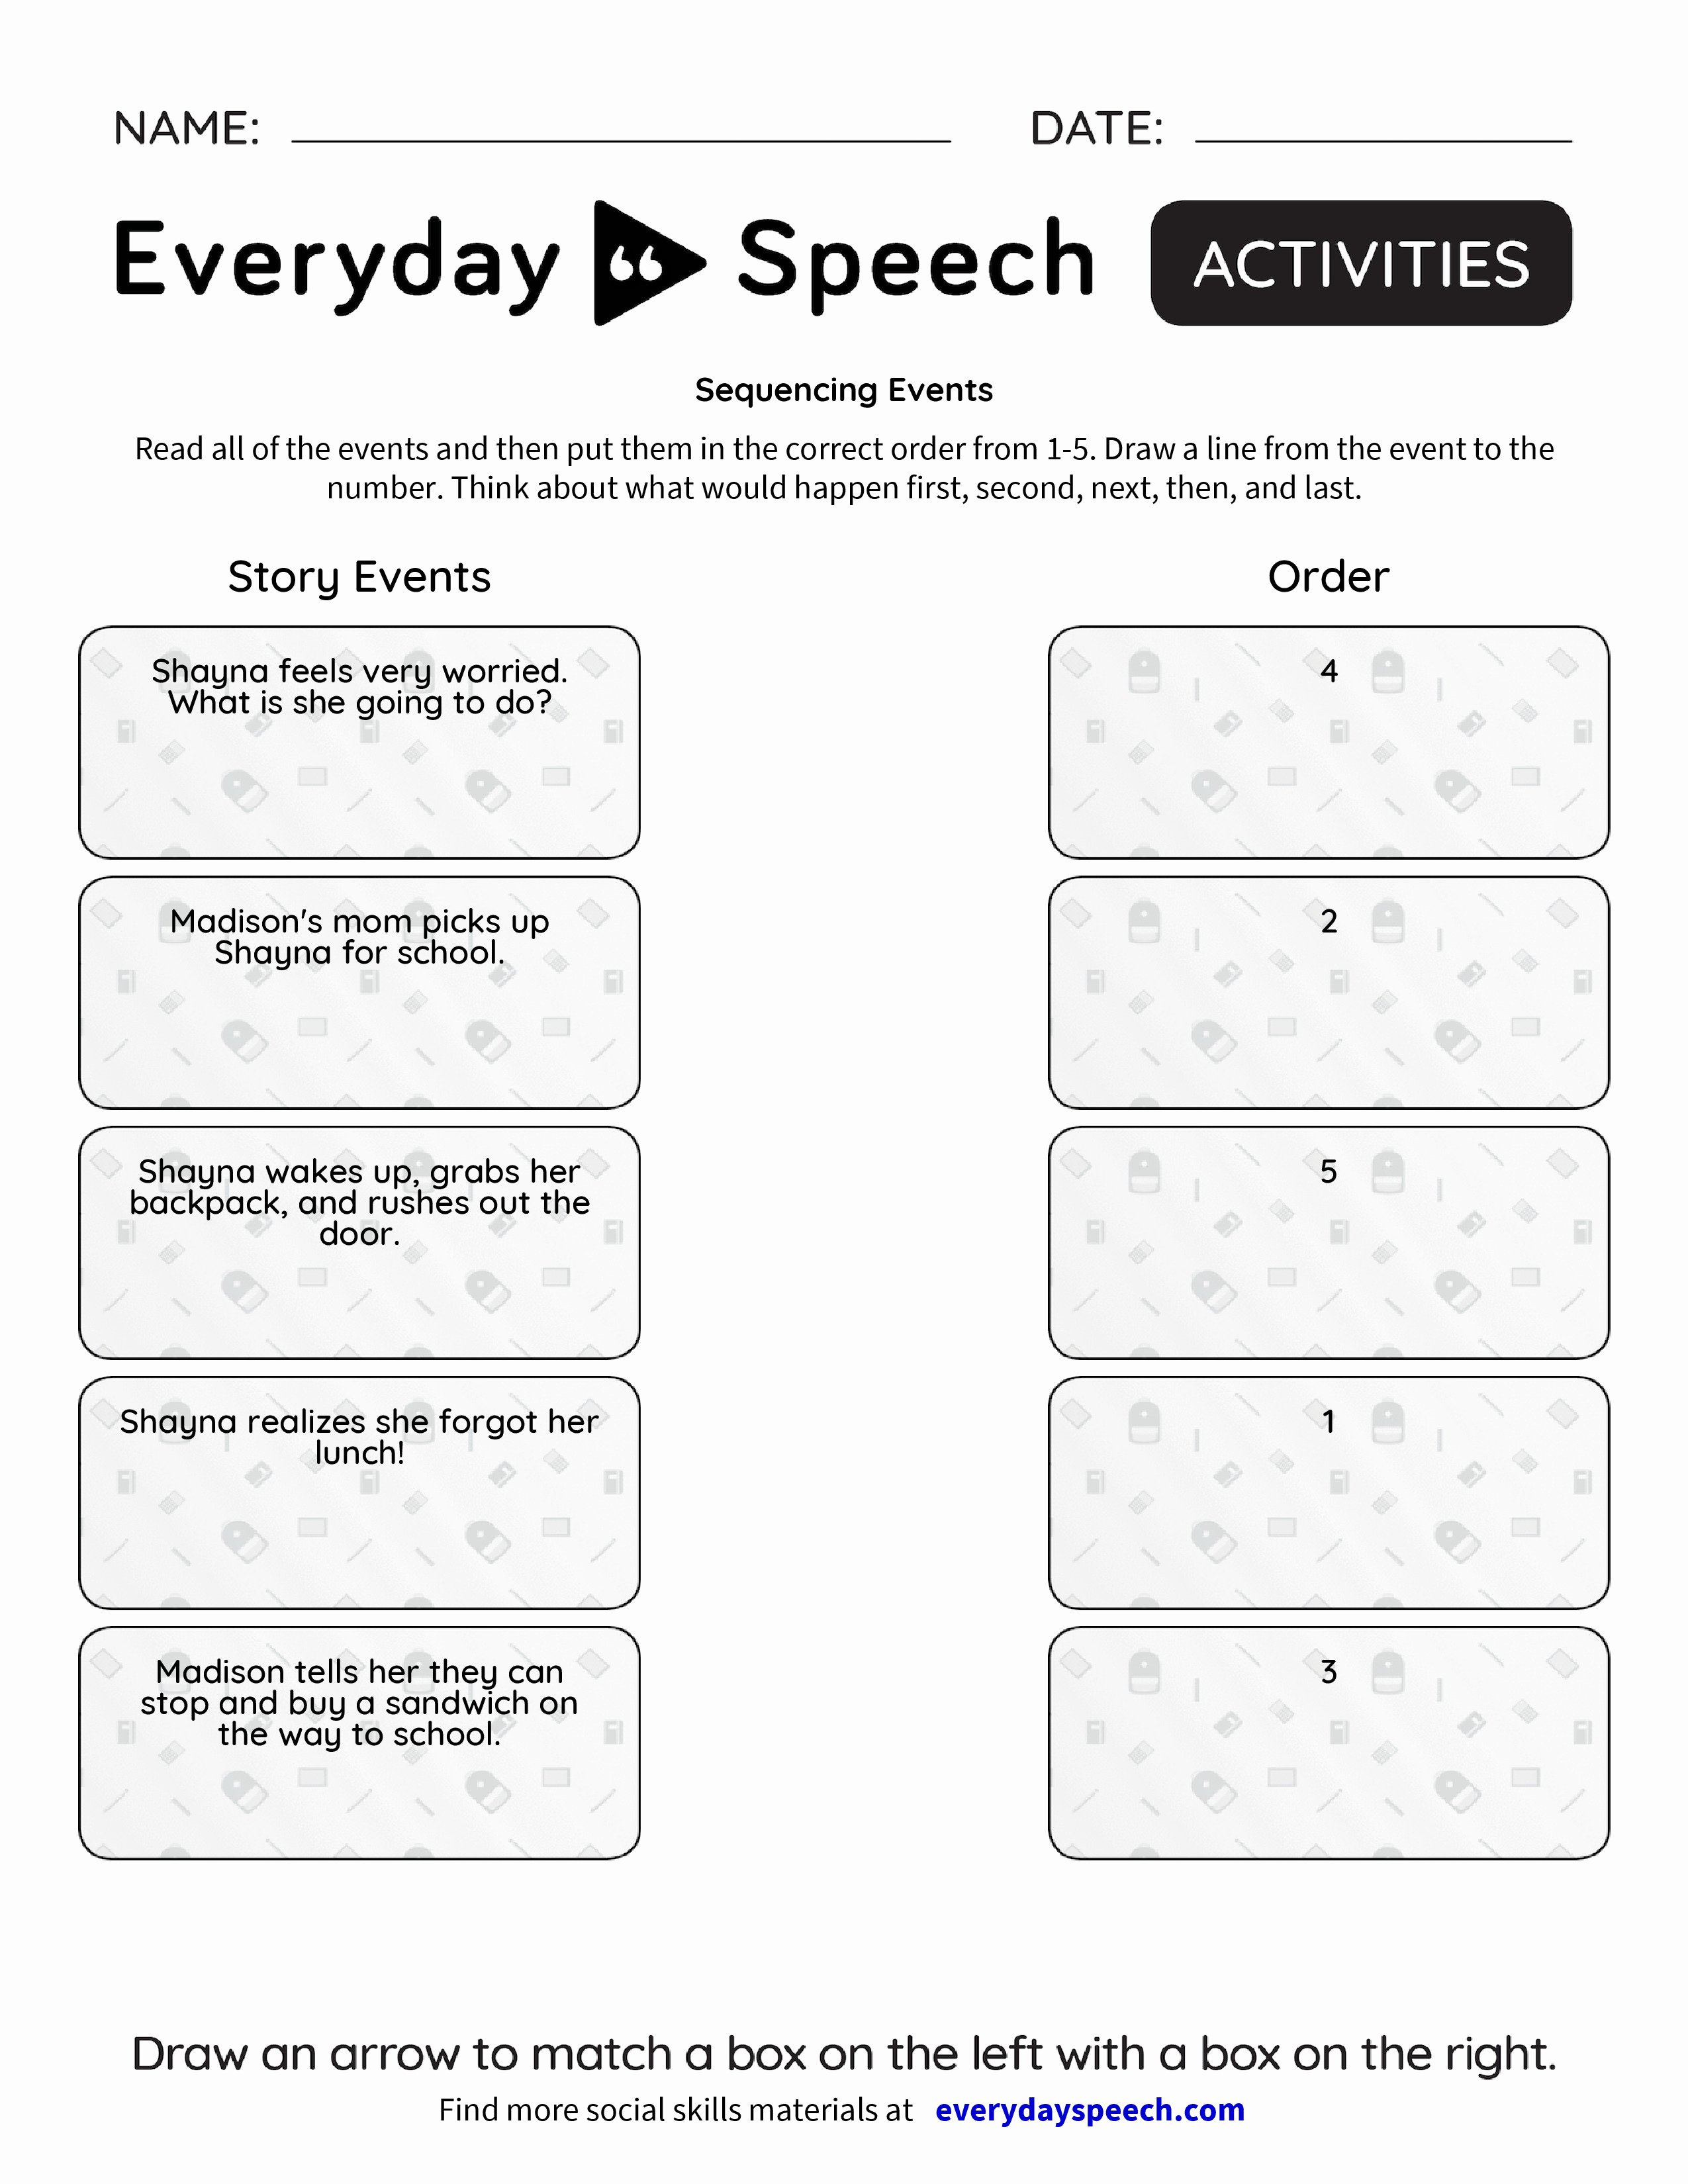 Sequence Of events Worksheet Awesome Sequencing events Everyday Speech Everyday Speech